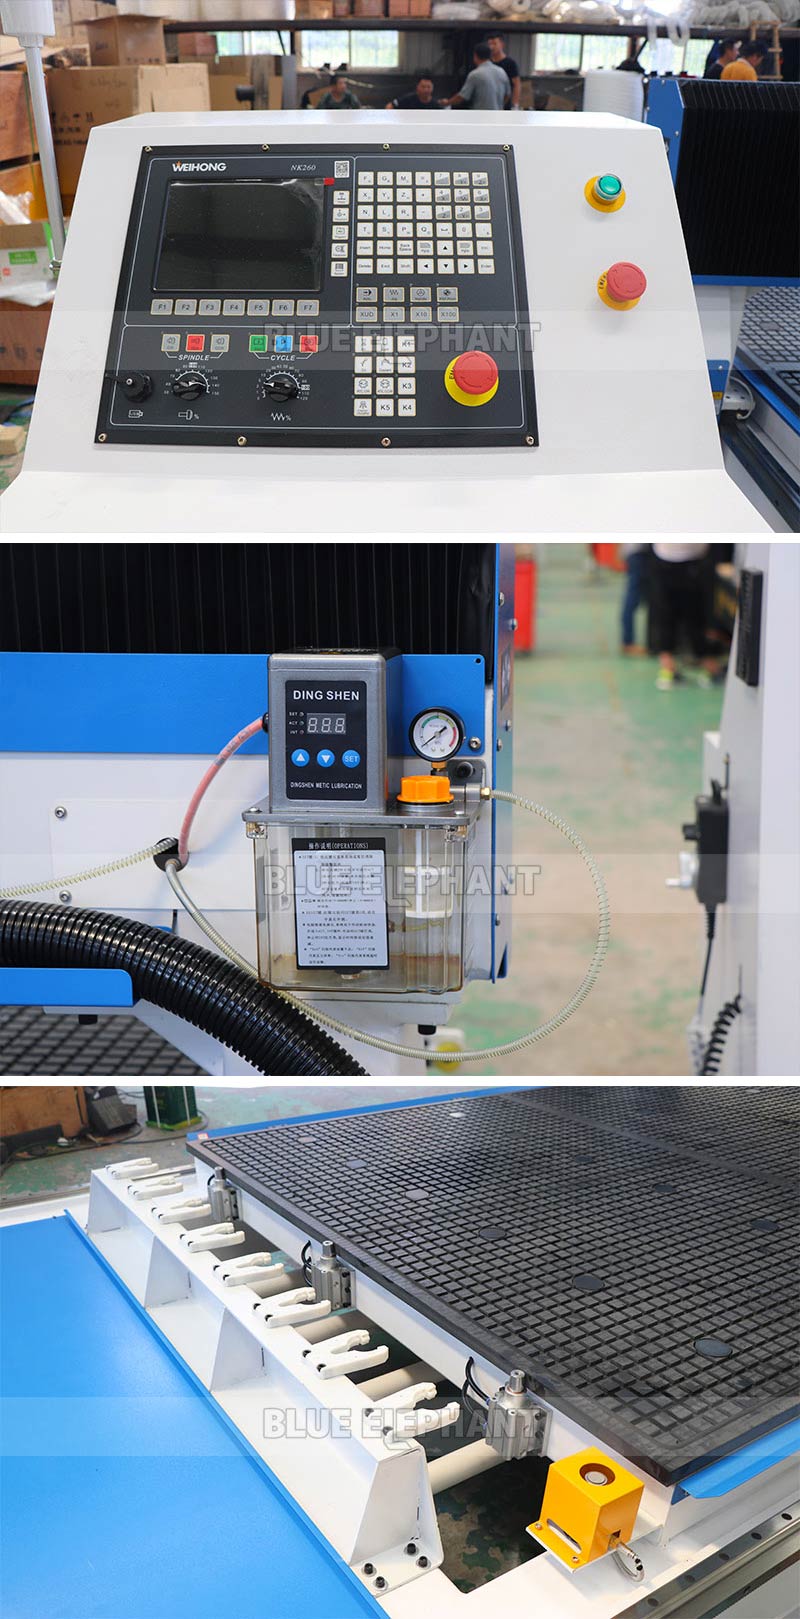 good quality 1530 atc cnc router for making wooden signs and kids furniture